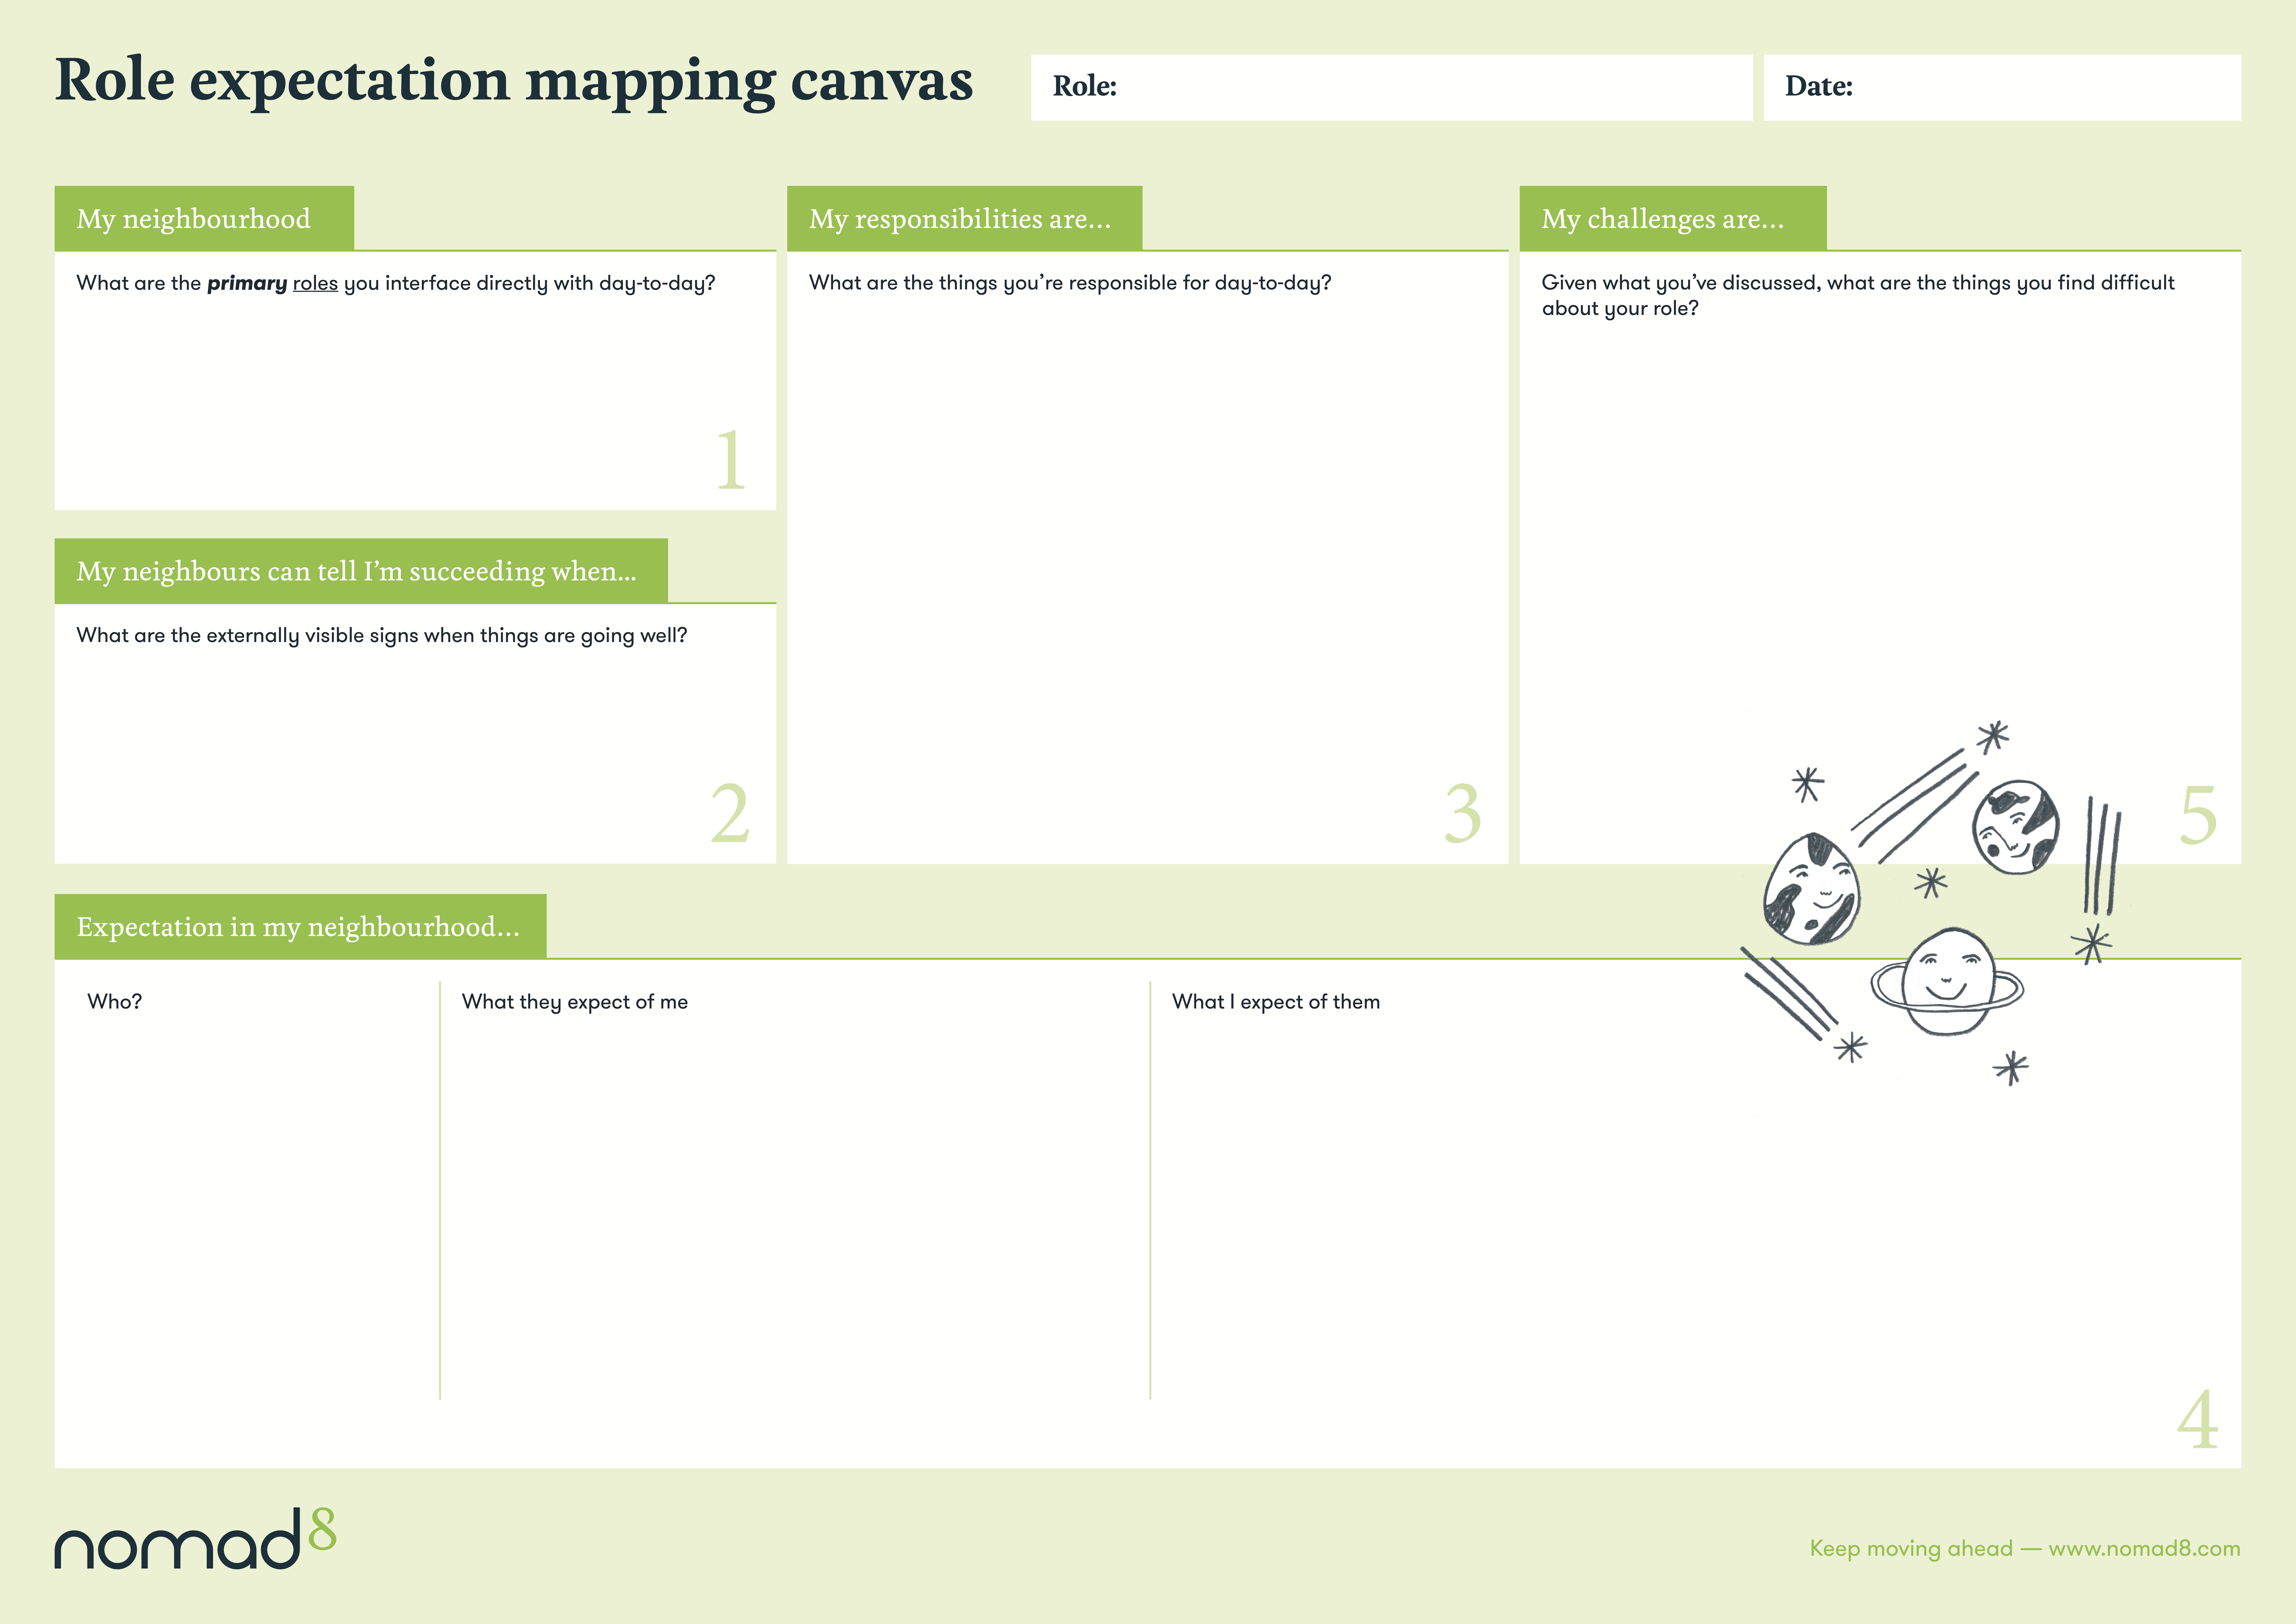 Role Expectation Mapping canvas